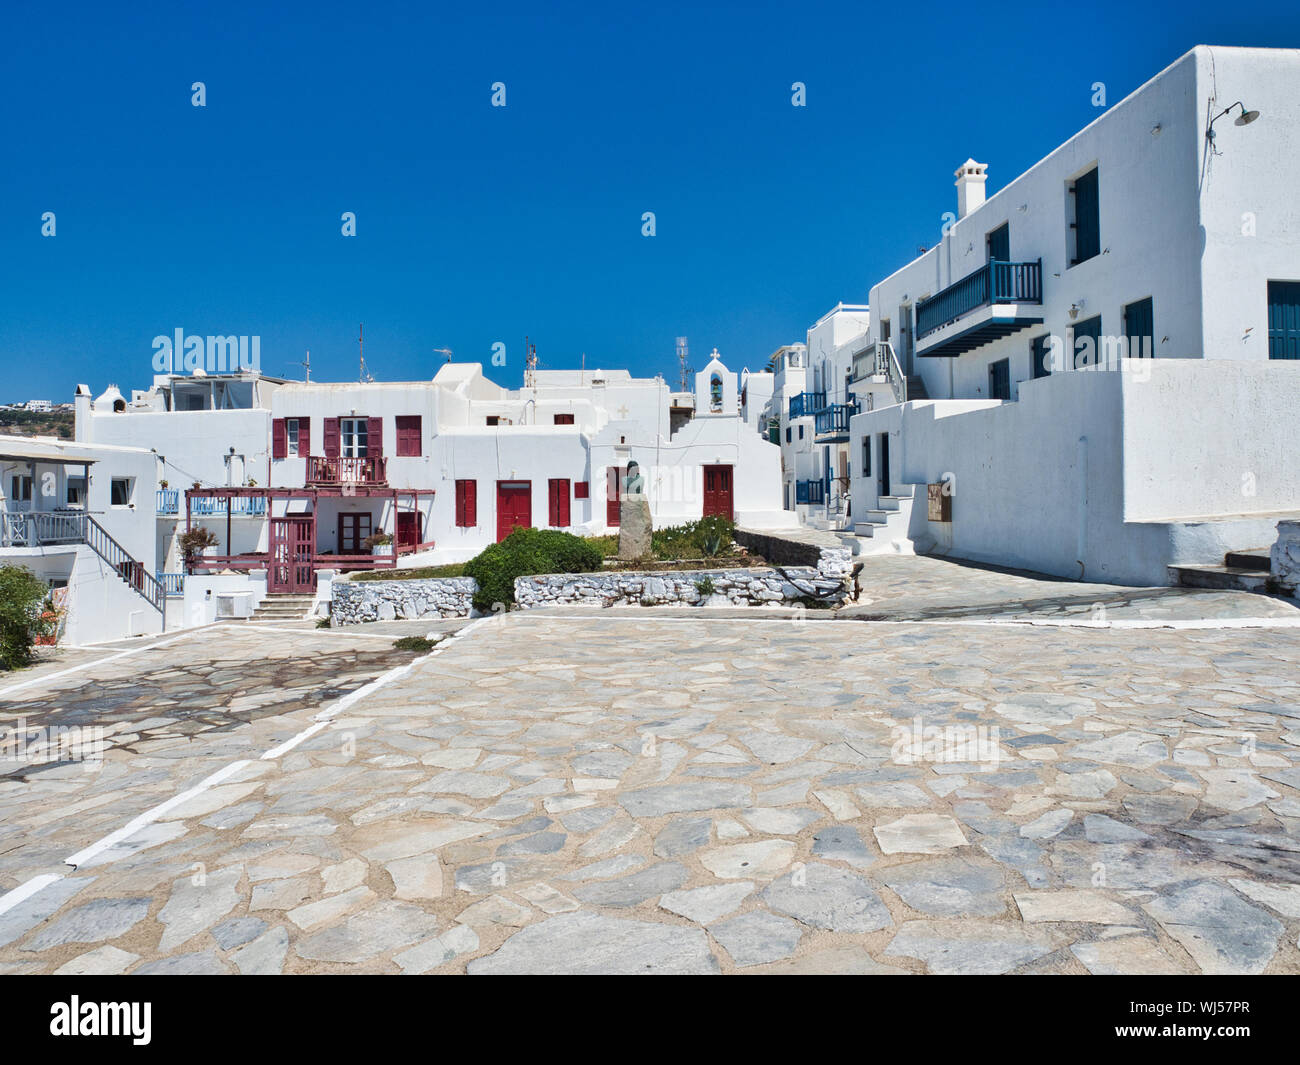 Ancient stone square surrounded by white houses against cloudless blue sky in town on Mykonos Island in Greece Stock Photo